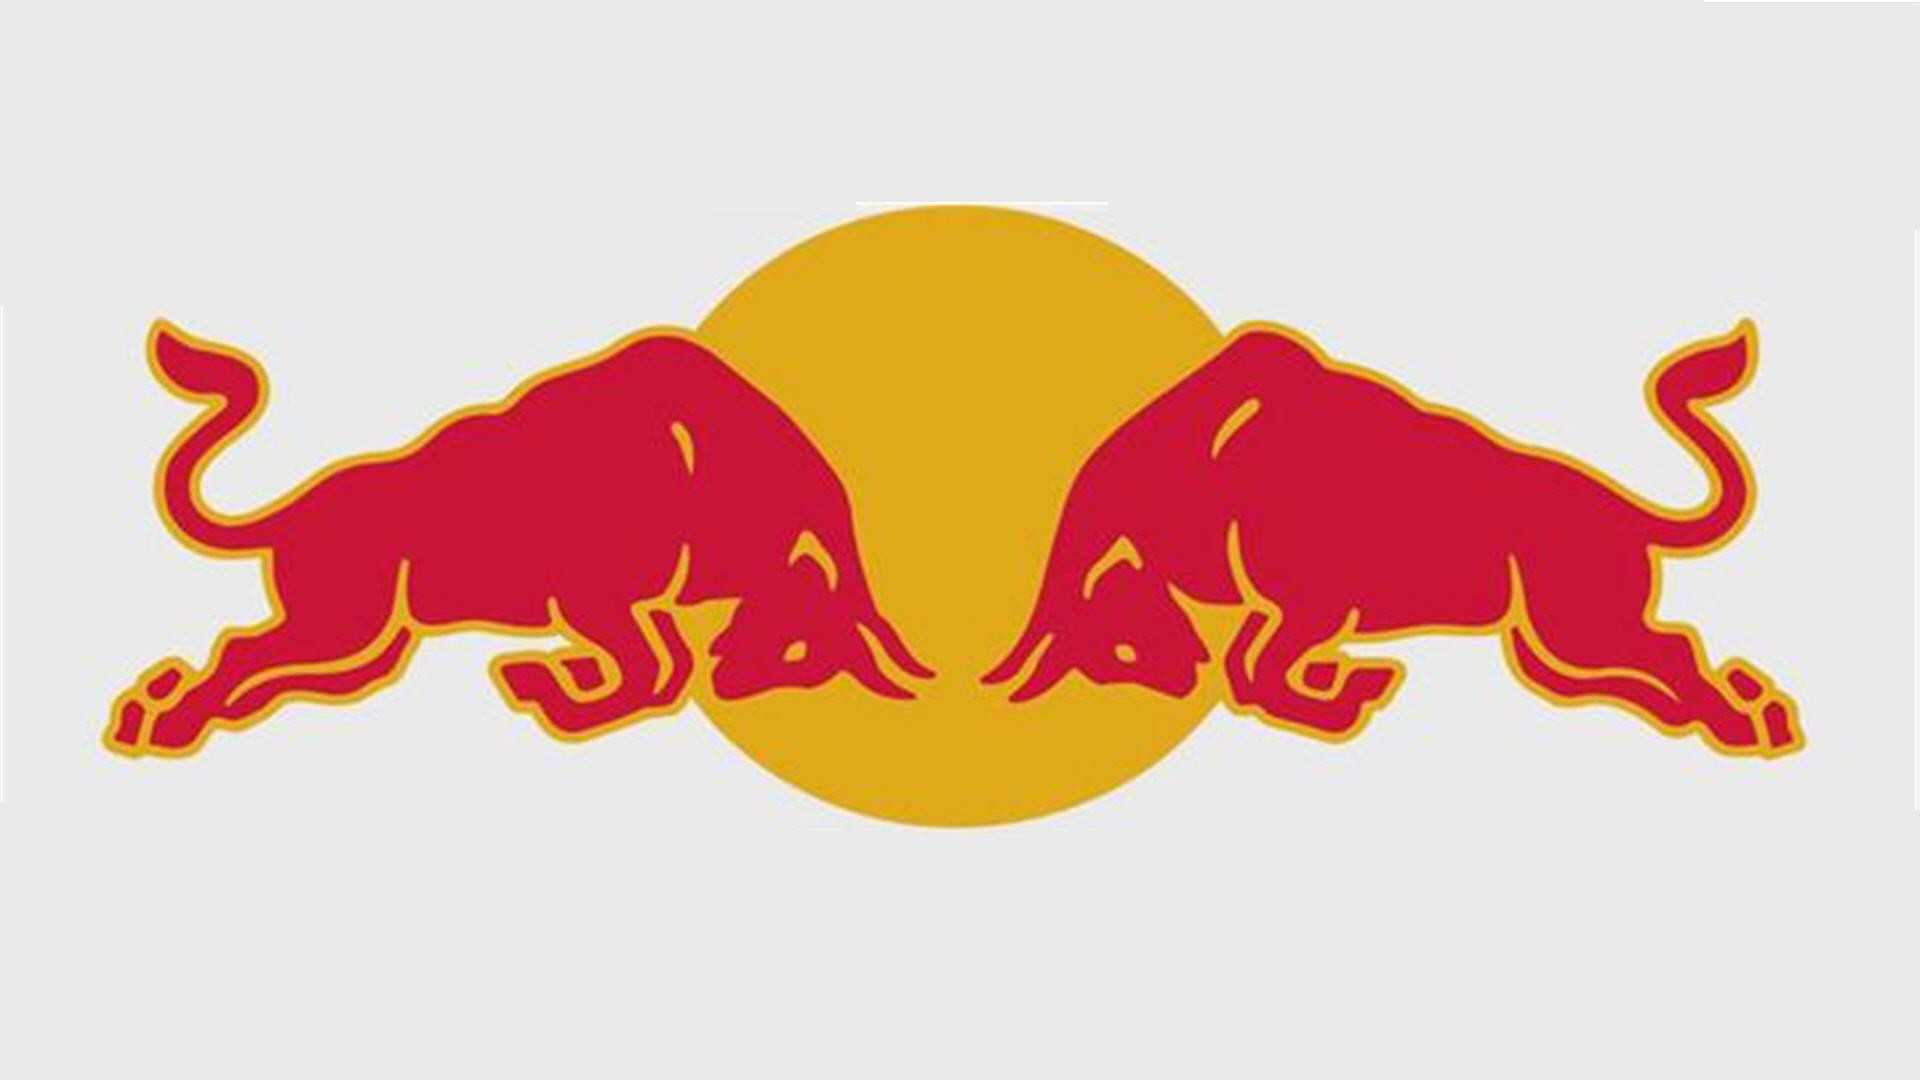 Amazing Logo Wallpaper Hd Red Bull Image Gallery Free - Transparent Red Bull Logo Png , HD Wallpaper & Backgrounds